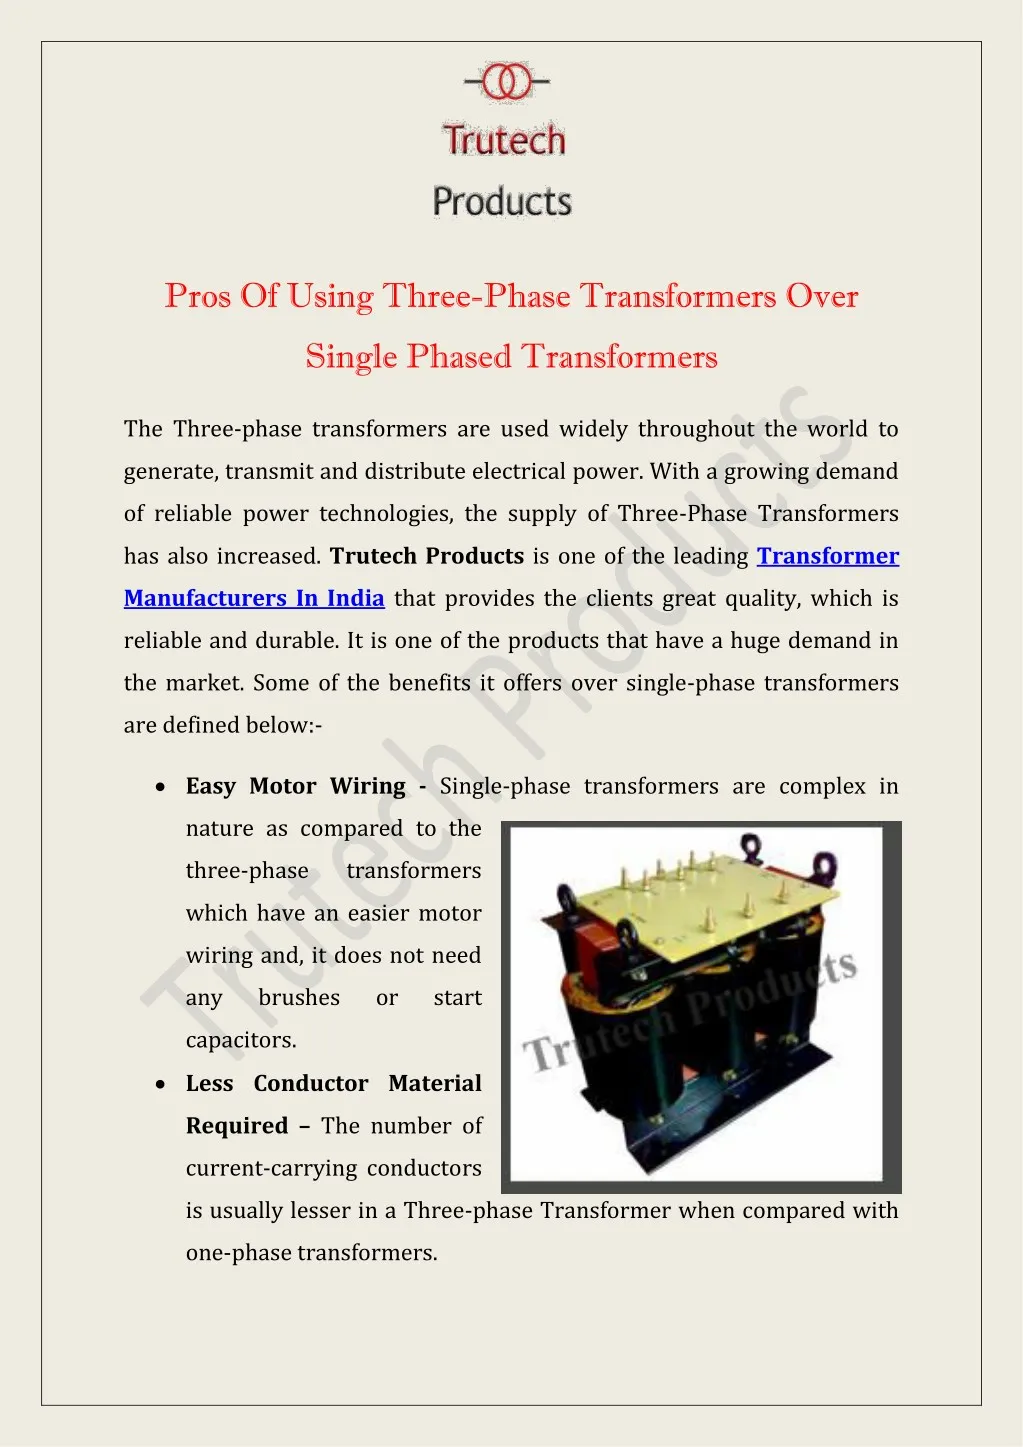 pros of using three phase transformers over